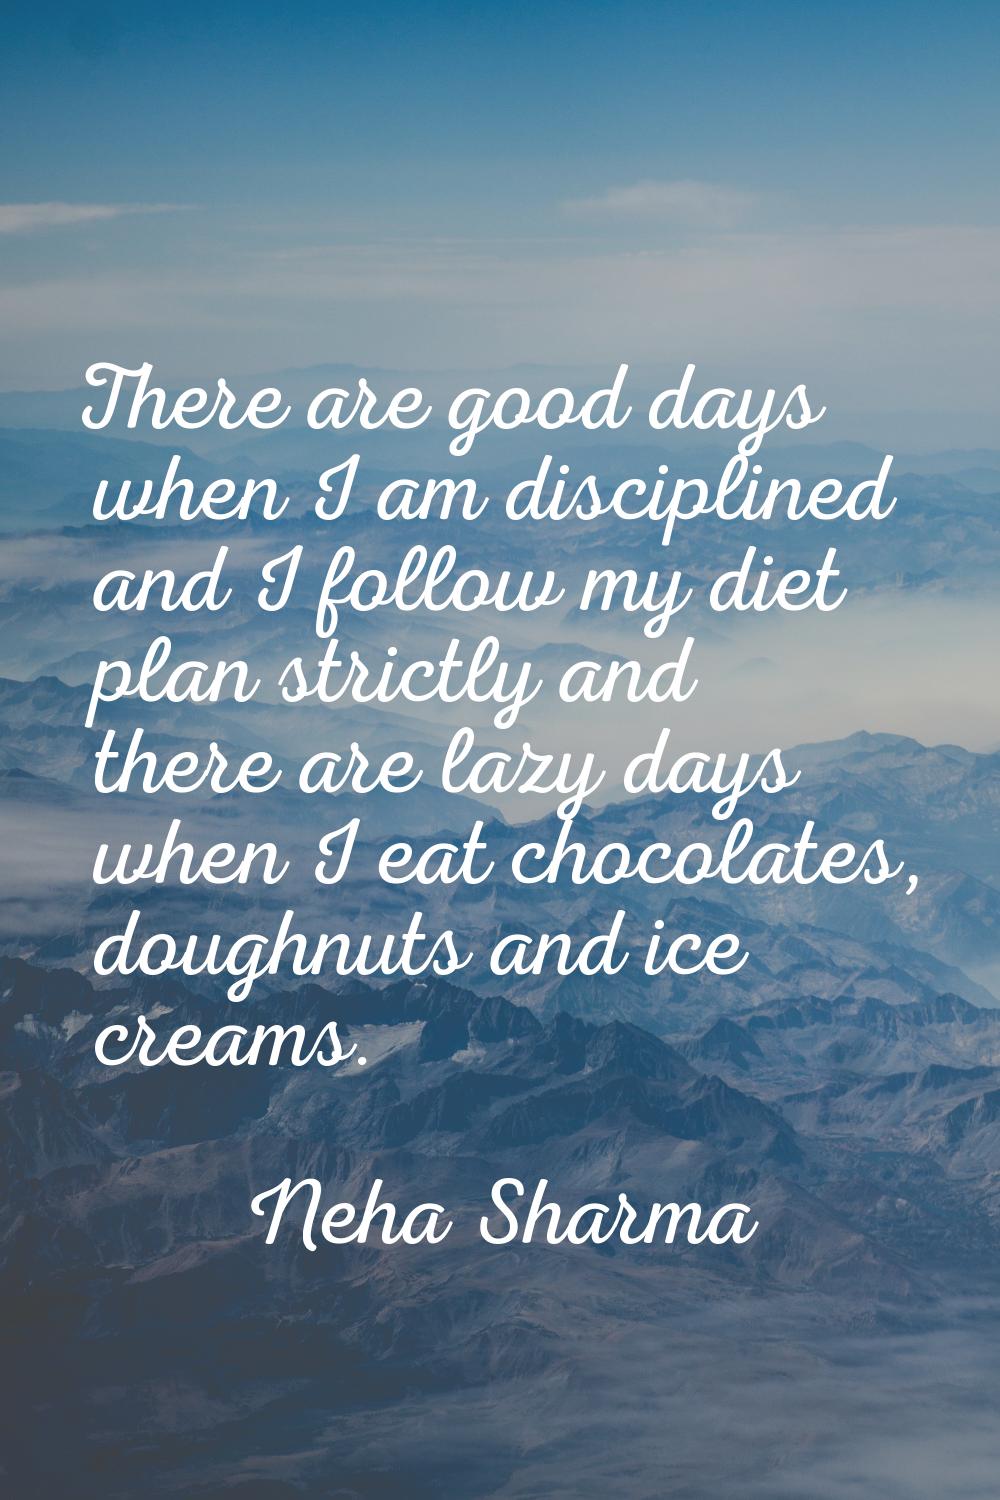 There are good days when I am disciplined and I follow my diet plan strictly and there are lazy day